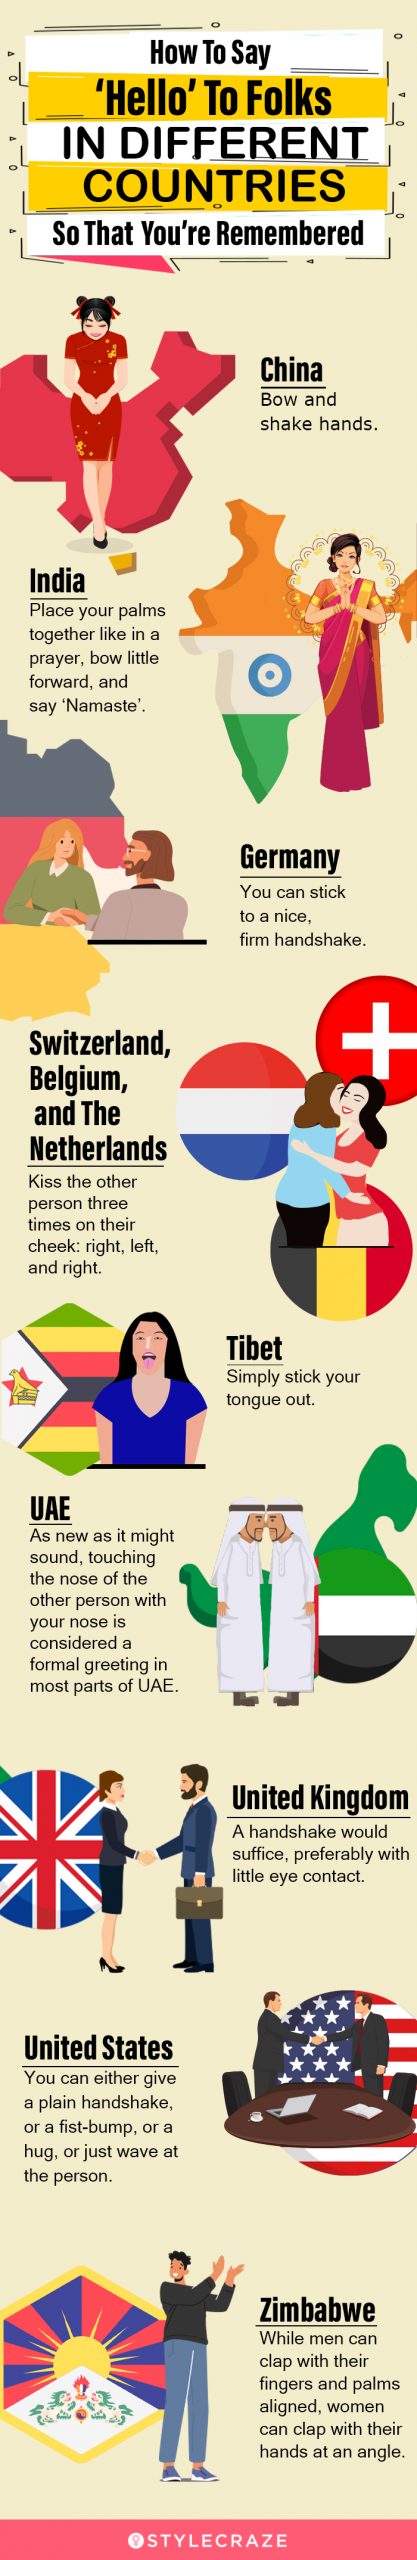 how to say ‘hello’ to folks in different countries so that you’re remembered [infographic]